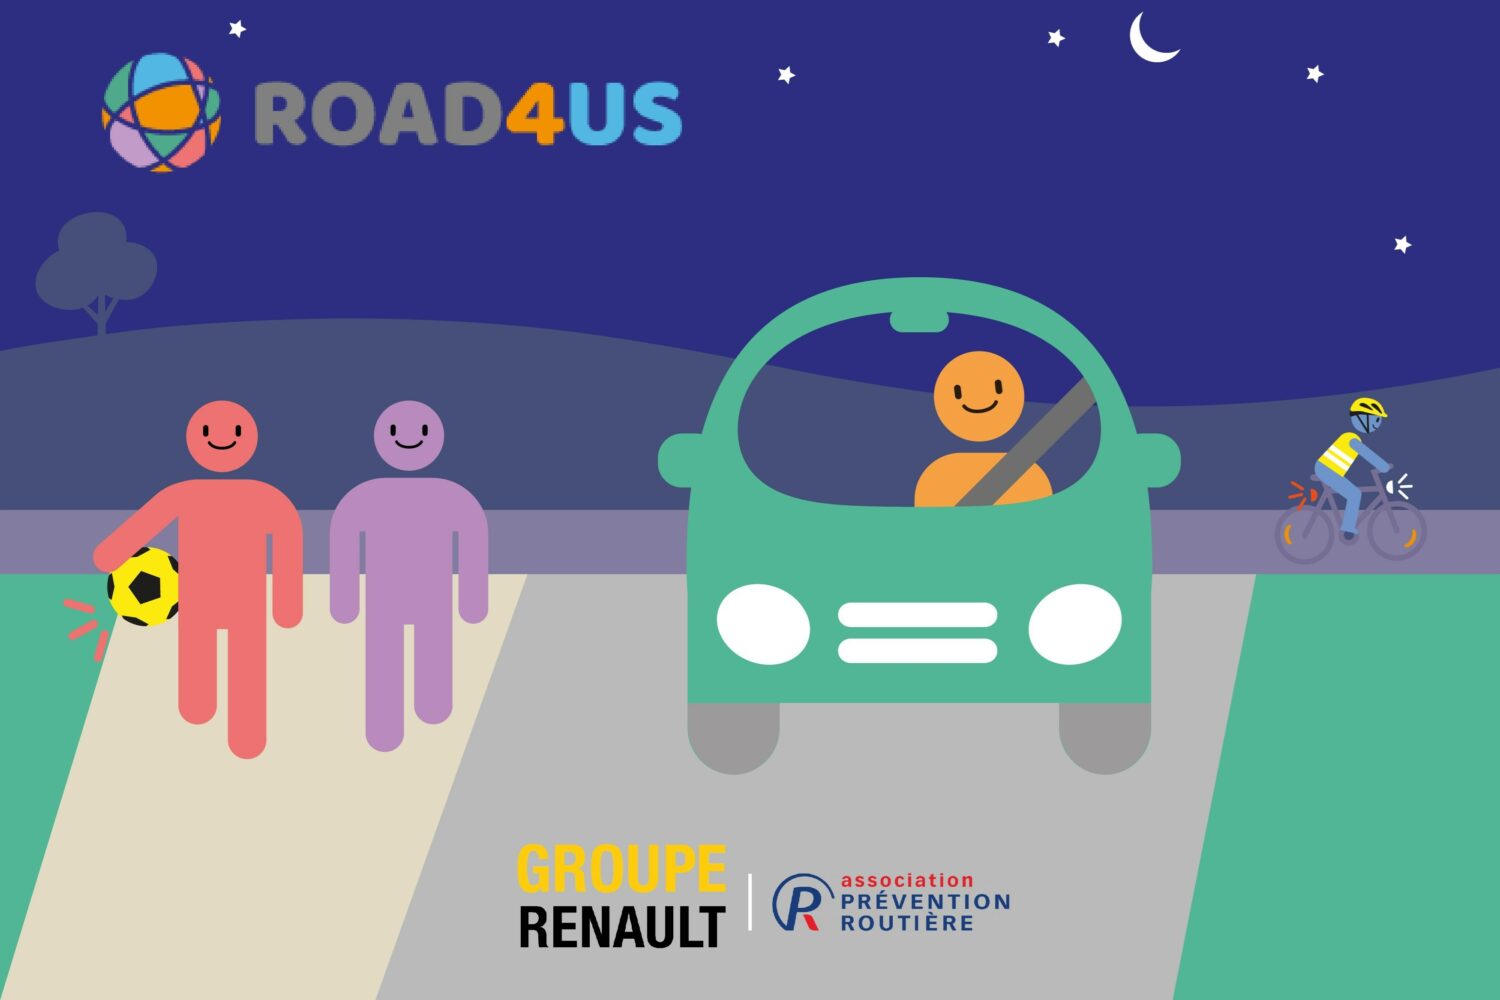 2020 - road4us road safety online site